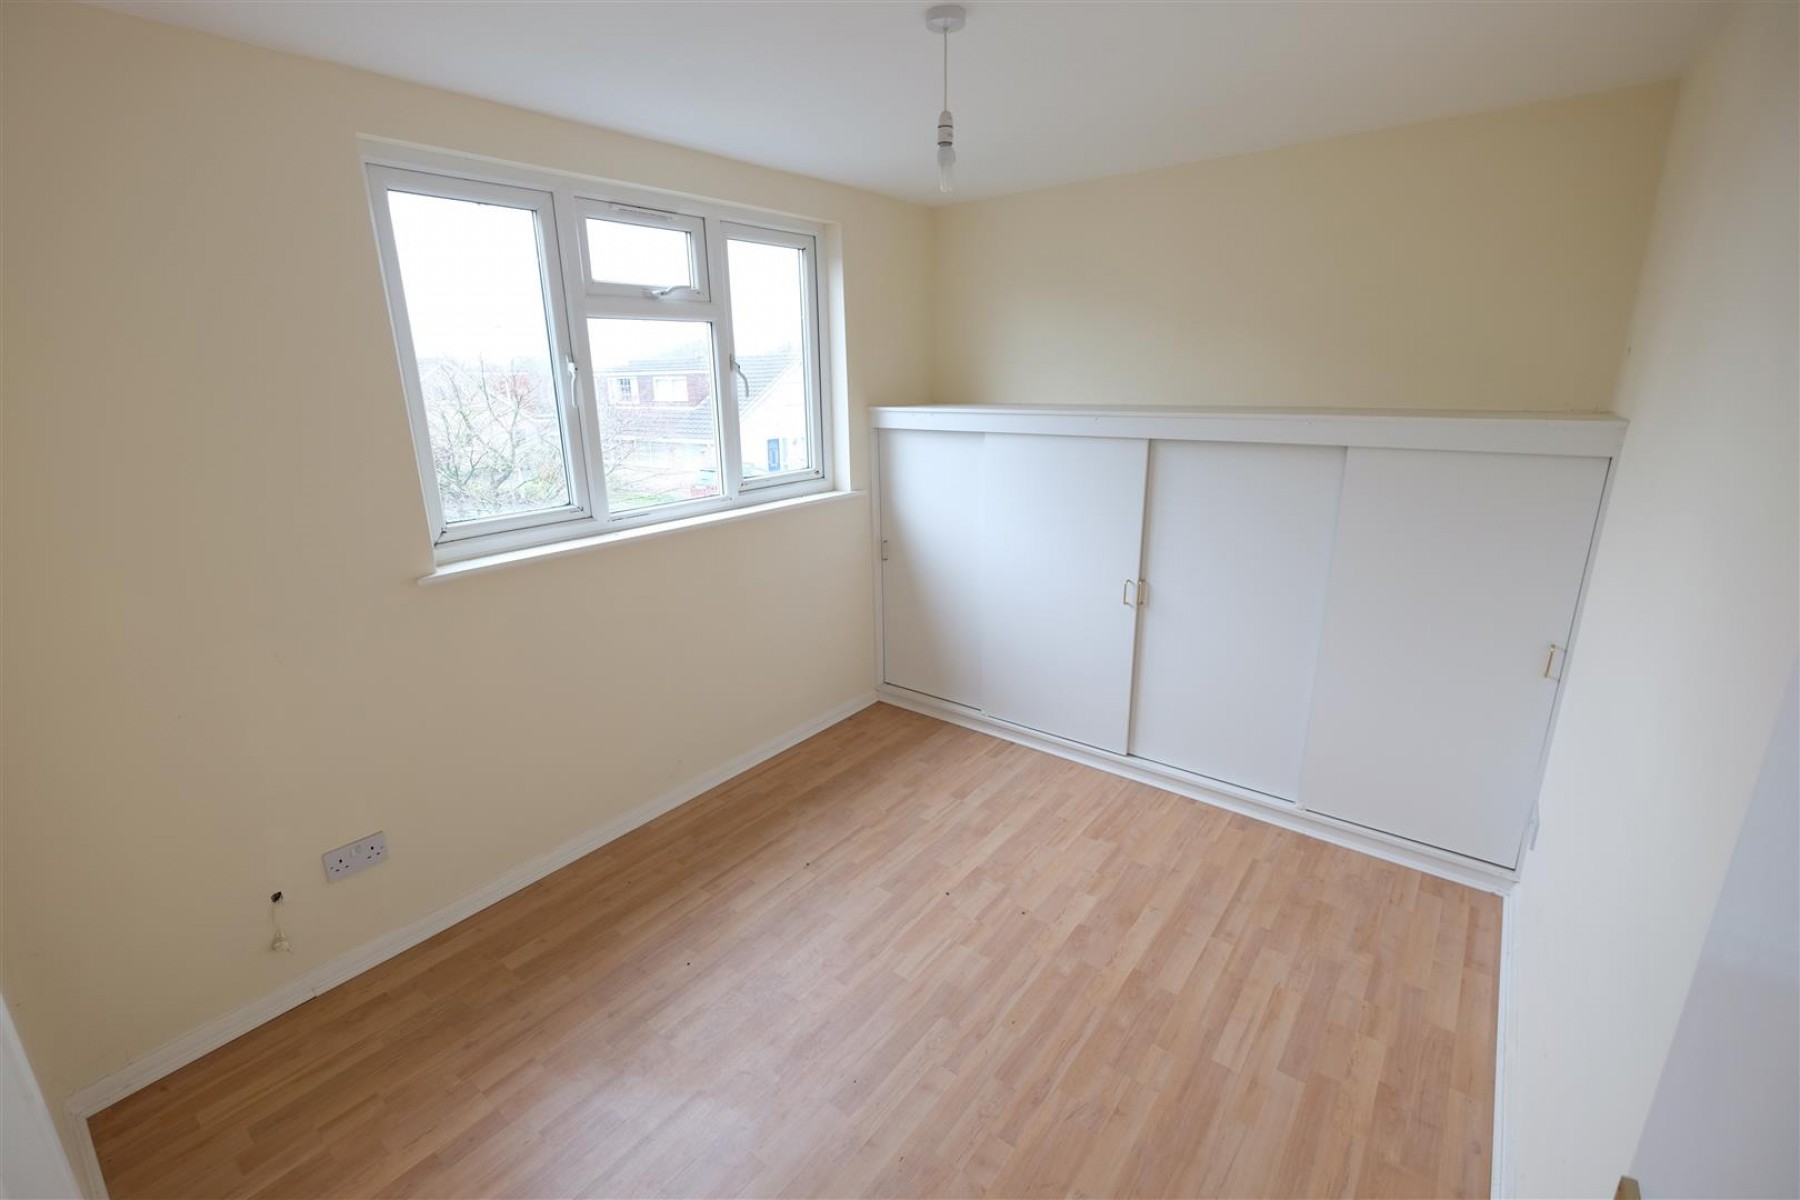 Images for 4 BED FOR UPDATING - YATTON